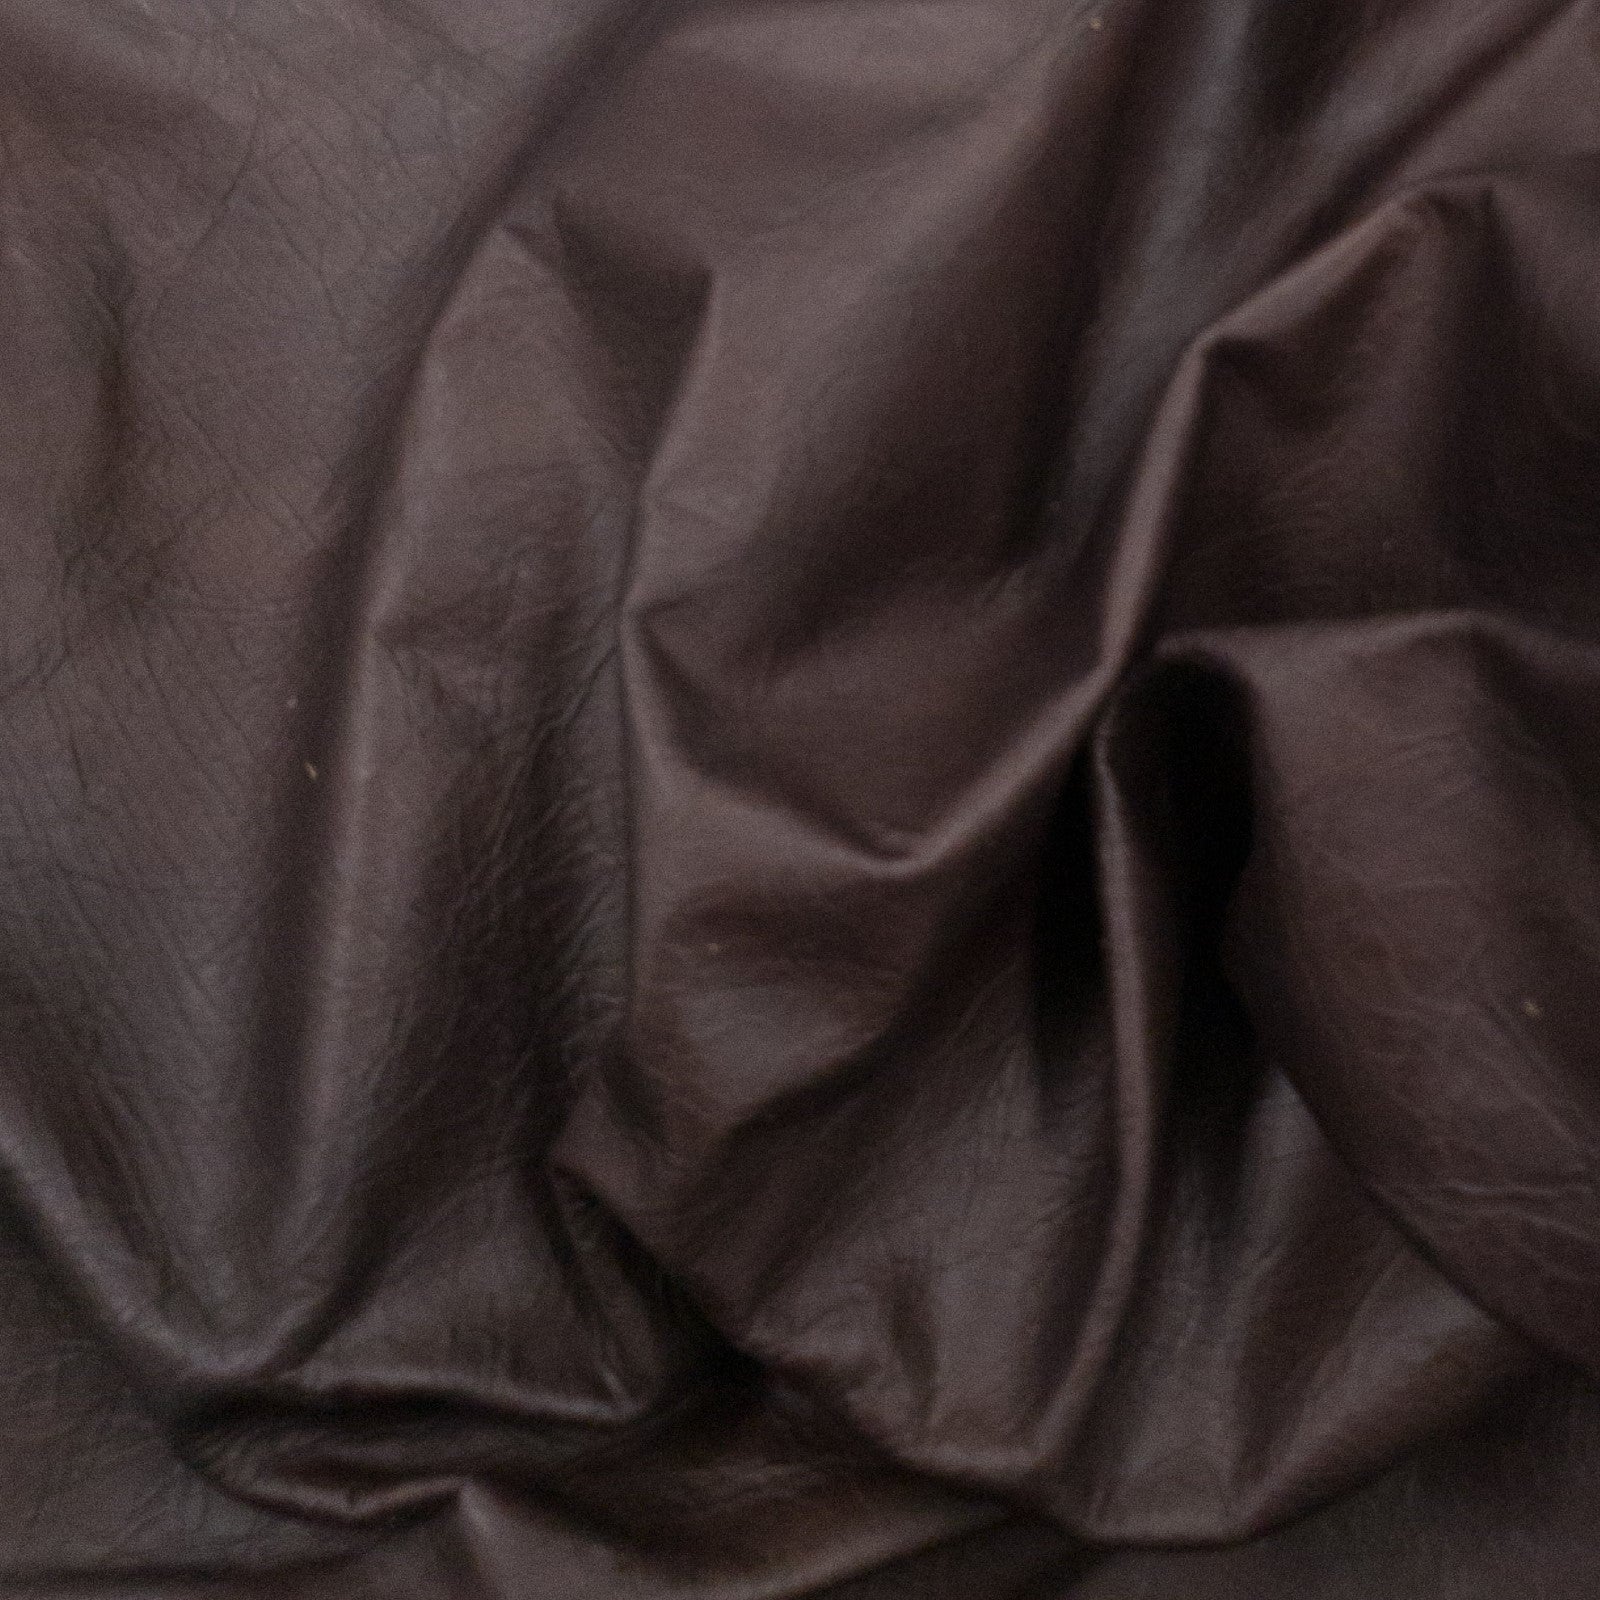 Dark Brown, 2-4 oz, 3-10 Sq Ft, Upholstery Cow Project Pieces, Dark Brown 5 (2-3oz) / 3-6 Sq ft | The Leather Guy